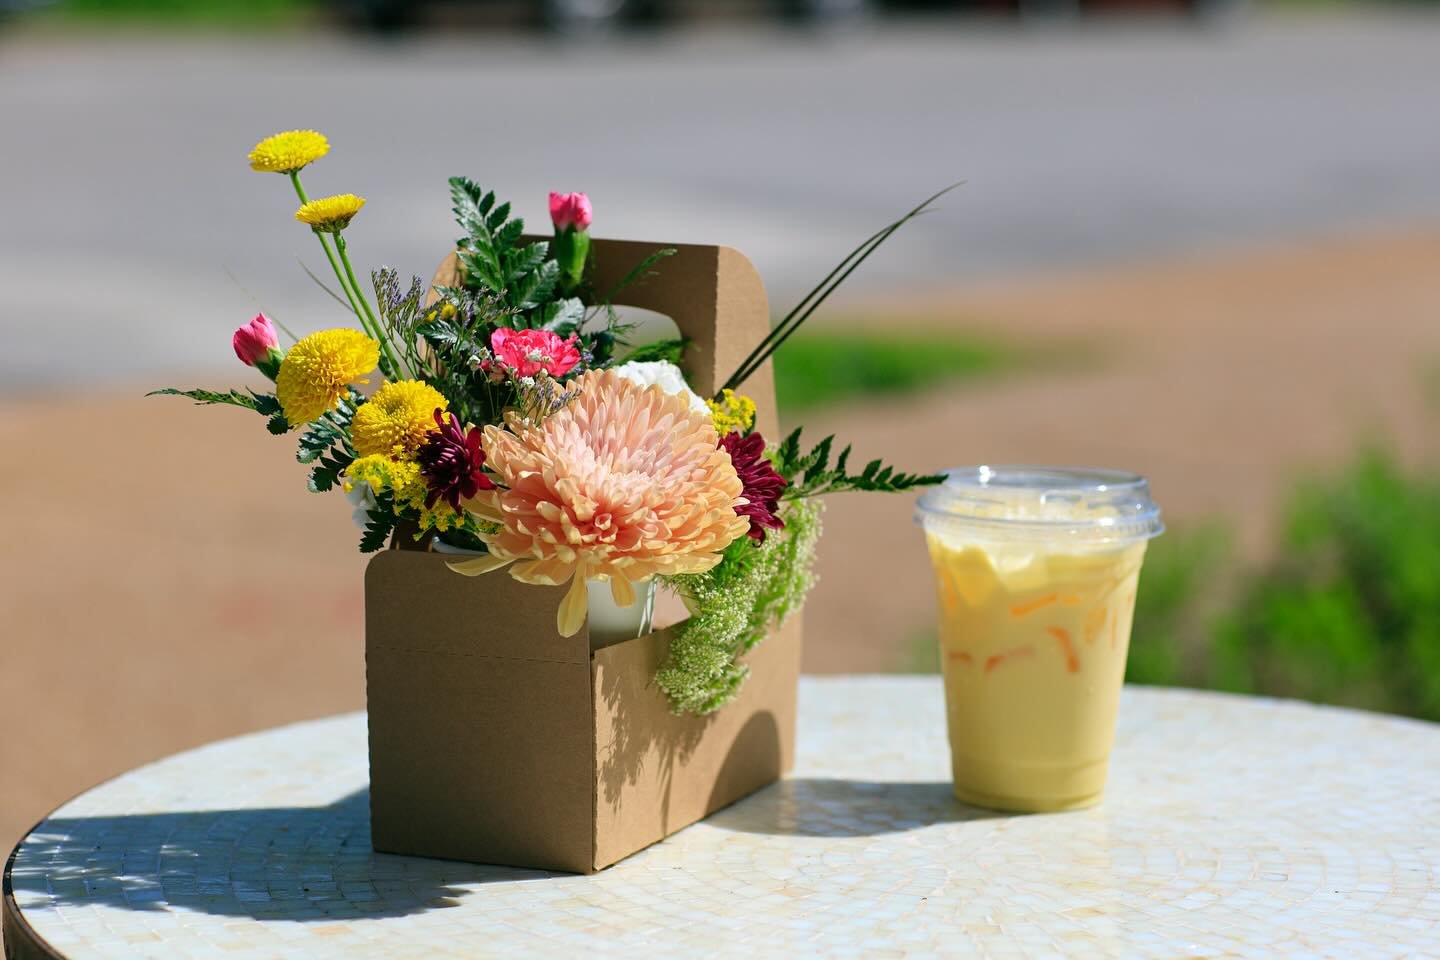 Today is the last day for Mother's Day pre-orders! If you're trying to throw out hints, share this post 🌿

&bull;&bull;&bull;

We're partnering with our neighborhood florist for Mother's Day coffee and bouquet combos! And they come together in a cut